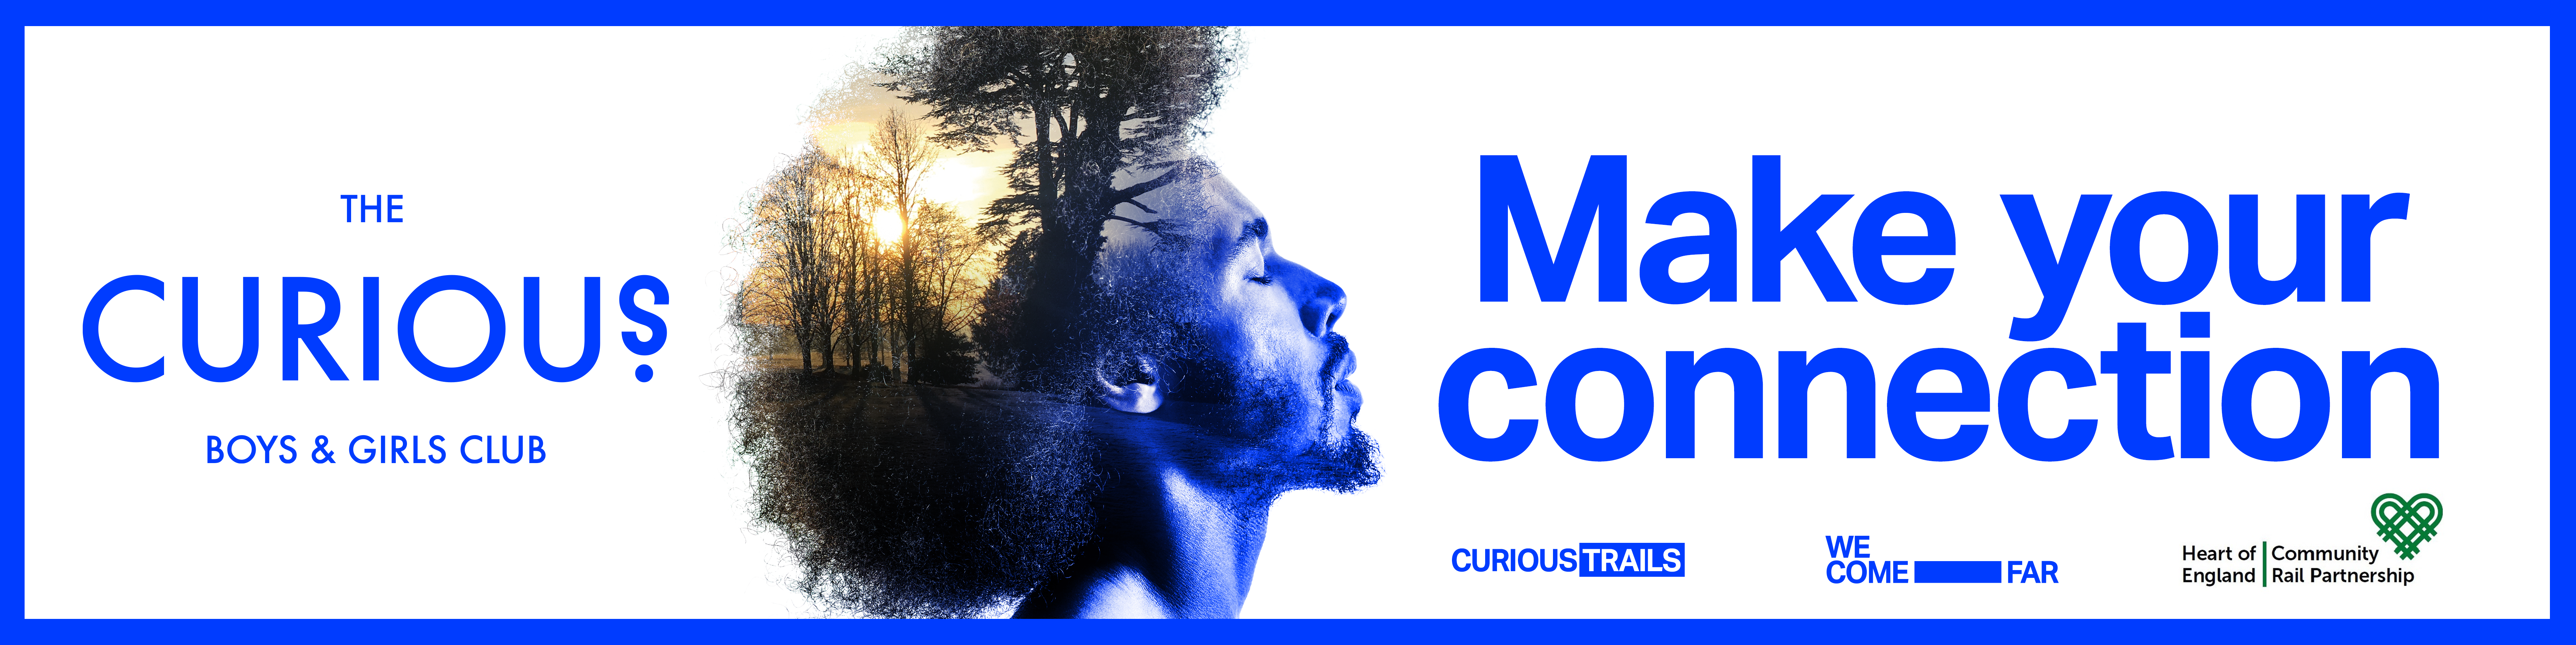 Banner with a man's head in silhouette with an image of trees in the hair.  Words - Make your connection. Curious Trails